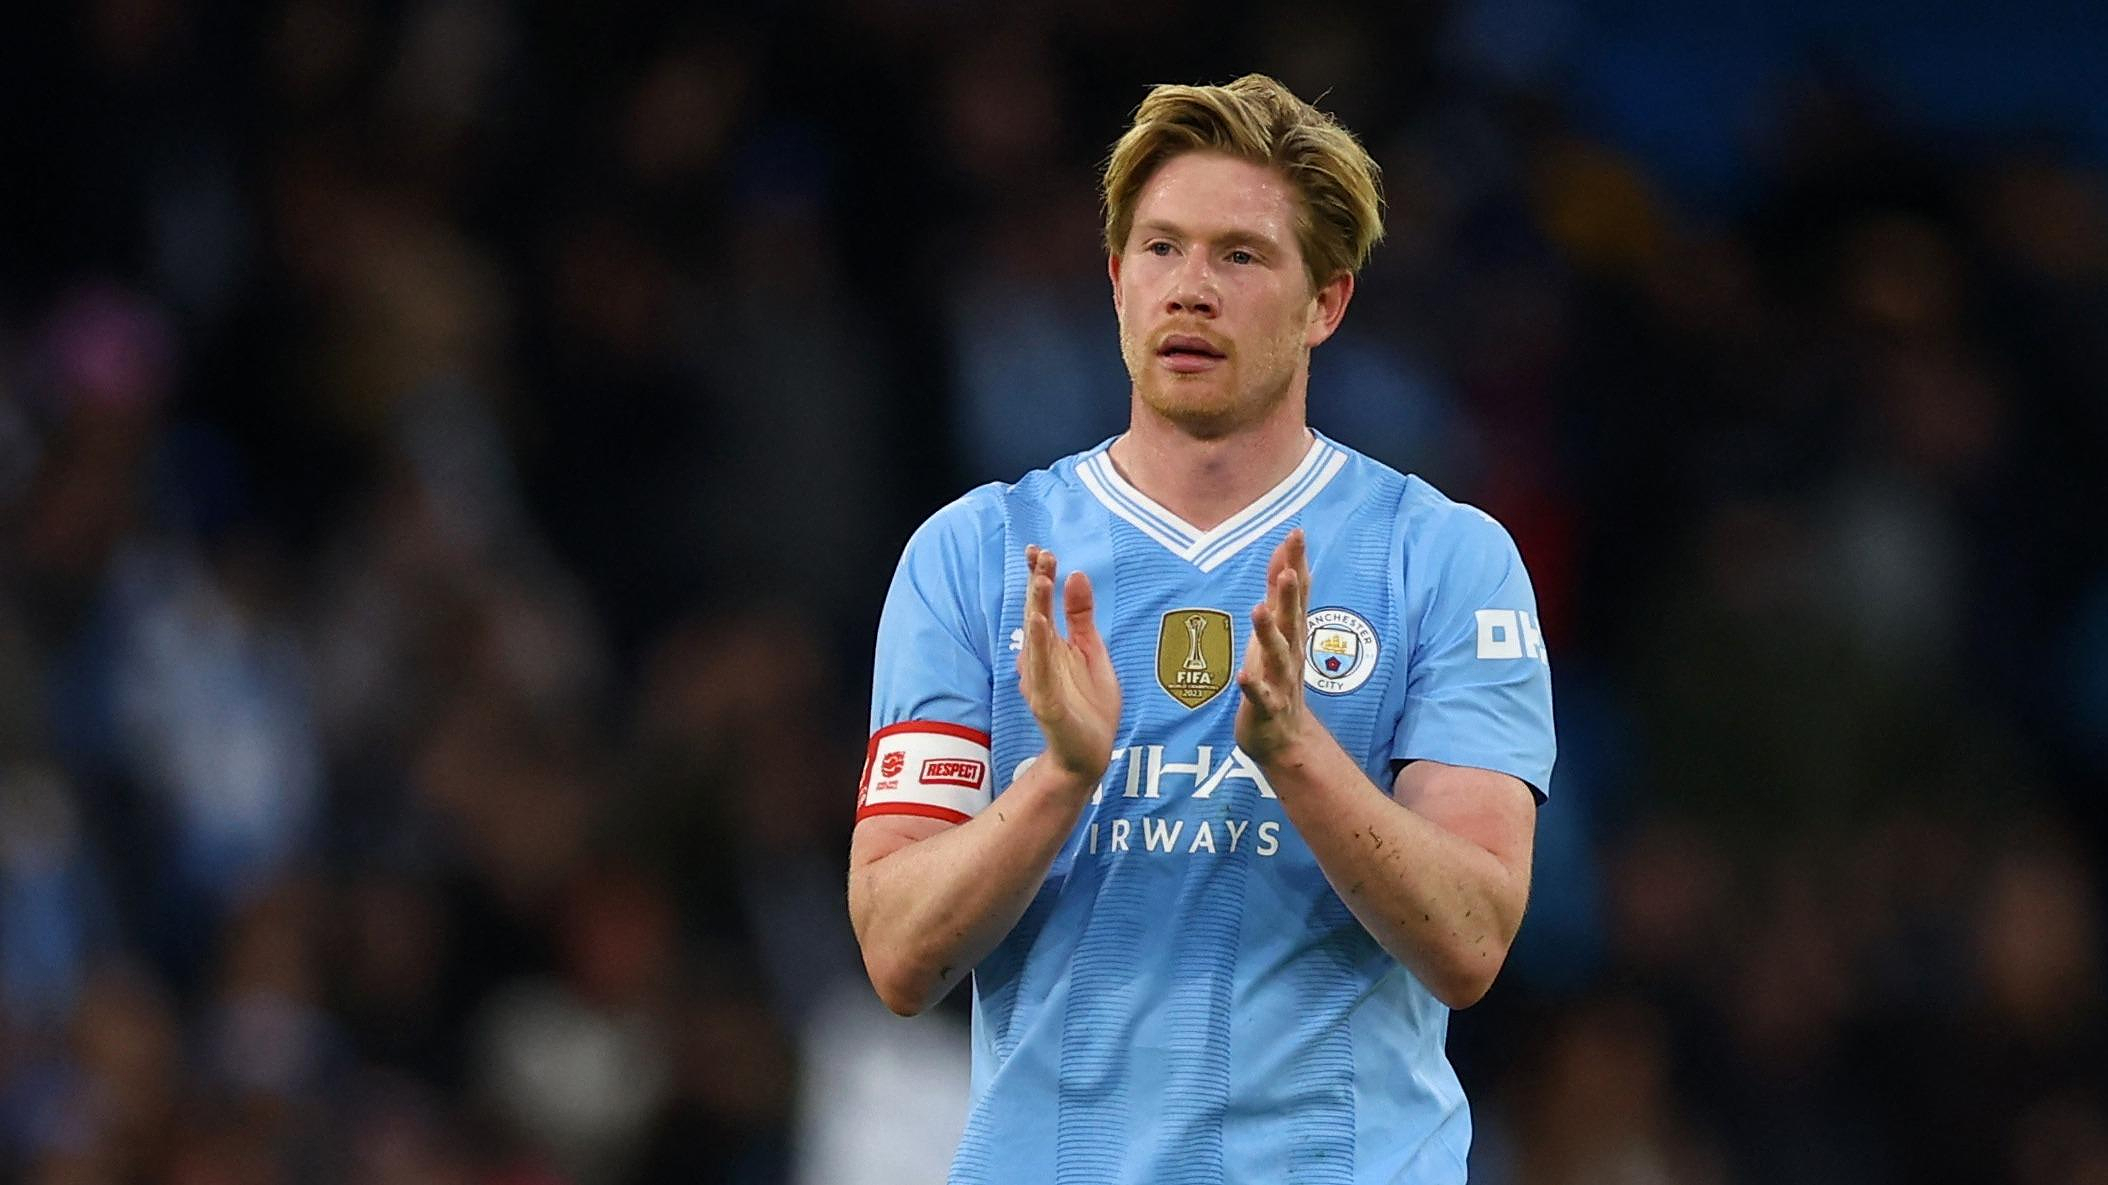 FA Cup: with the return of De Bruyne, Manchester City unfolds